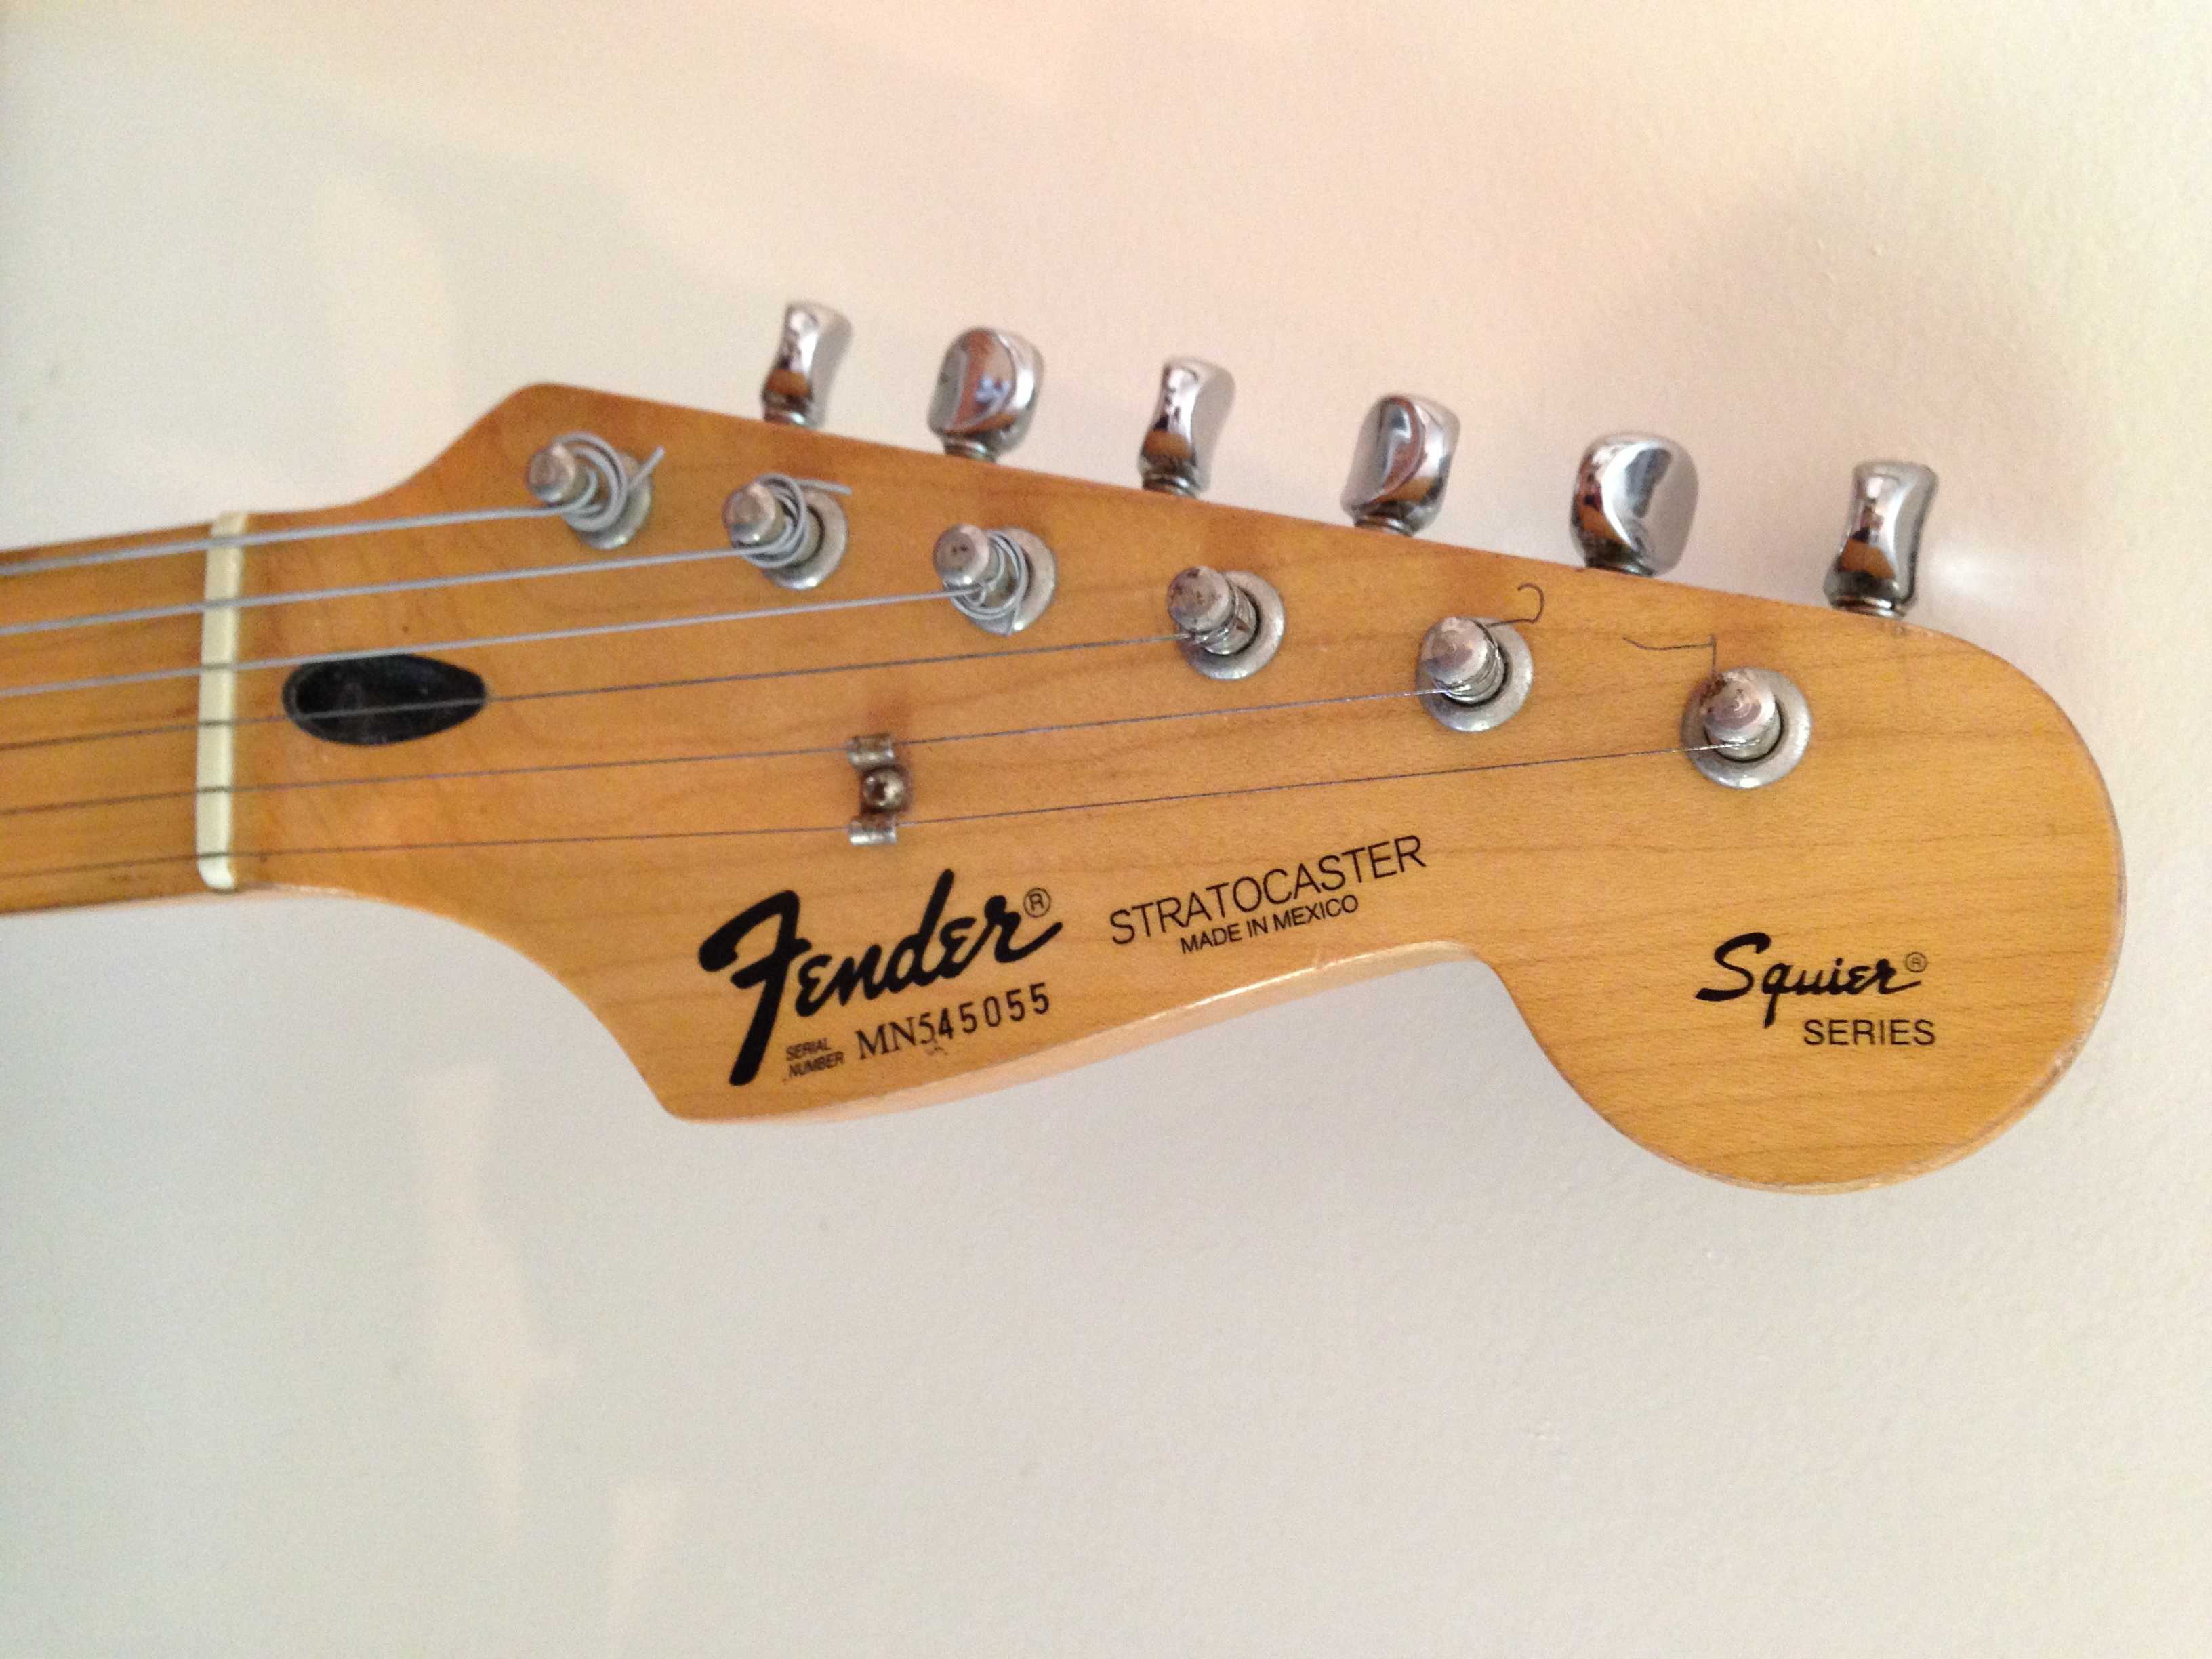 Photo Fender Stratocaster made in mexico "Squier Series" : Fender